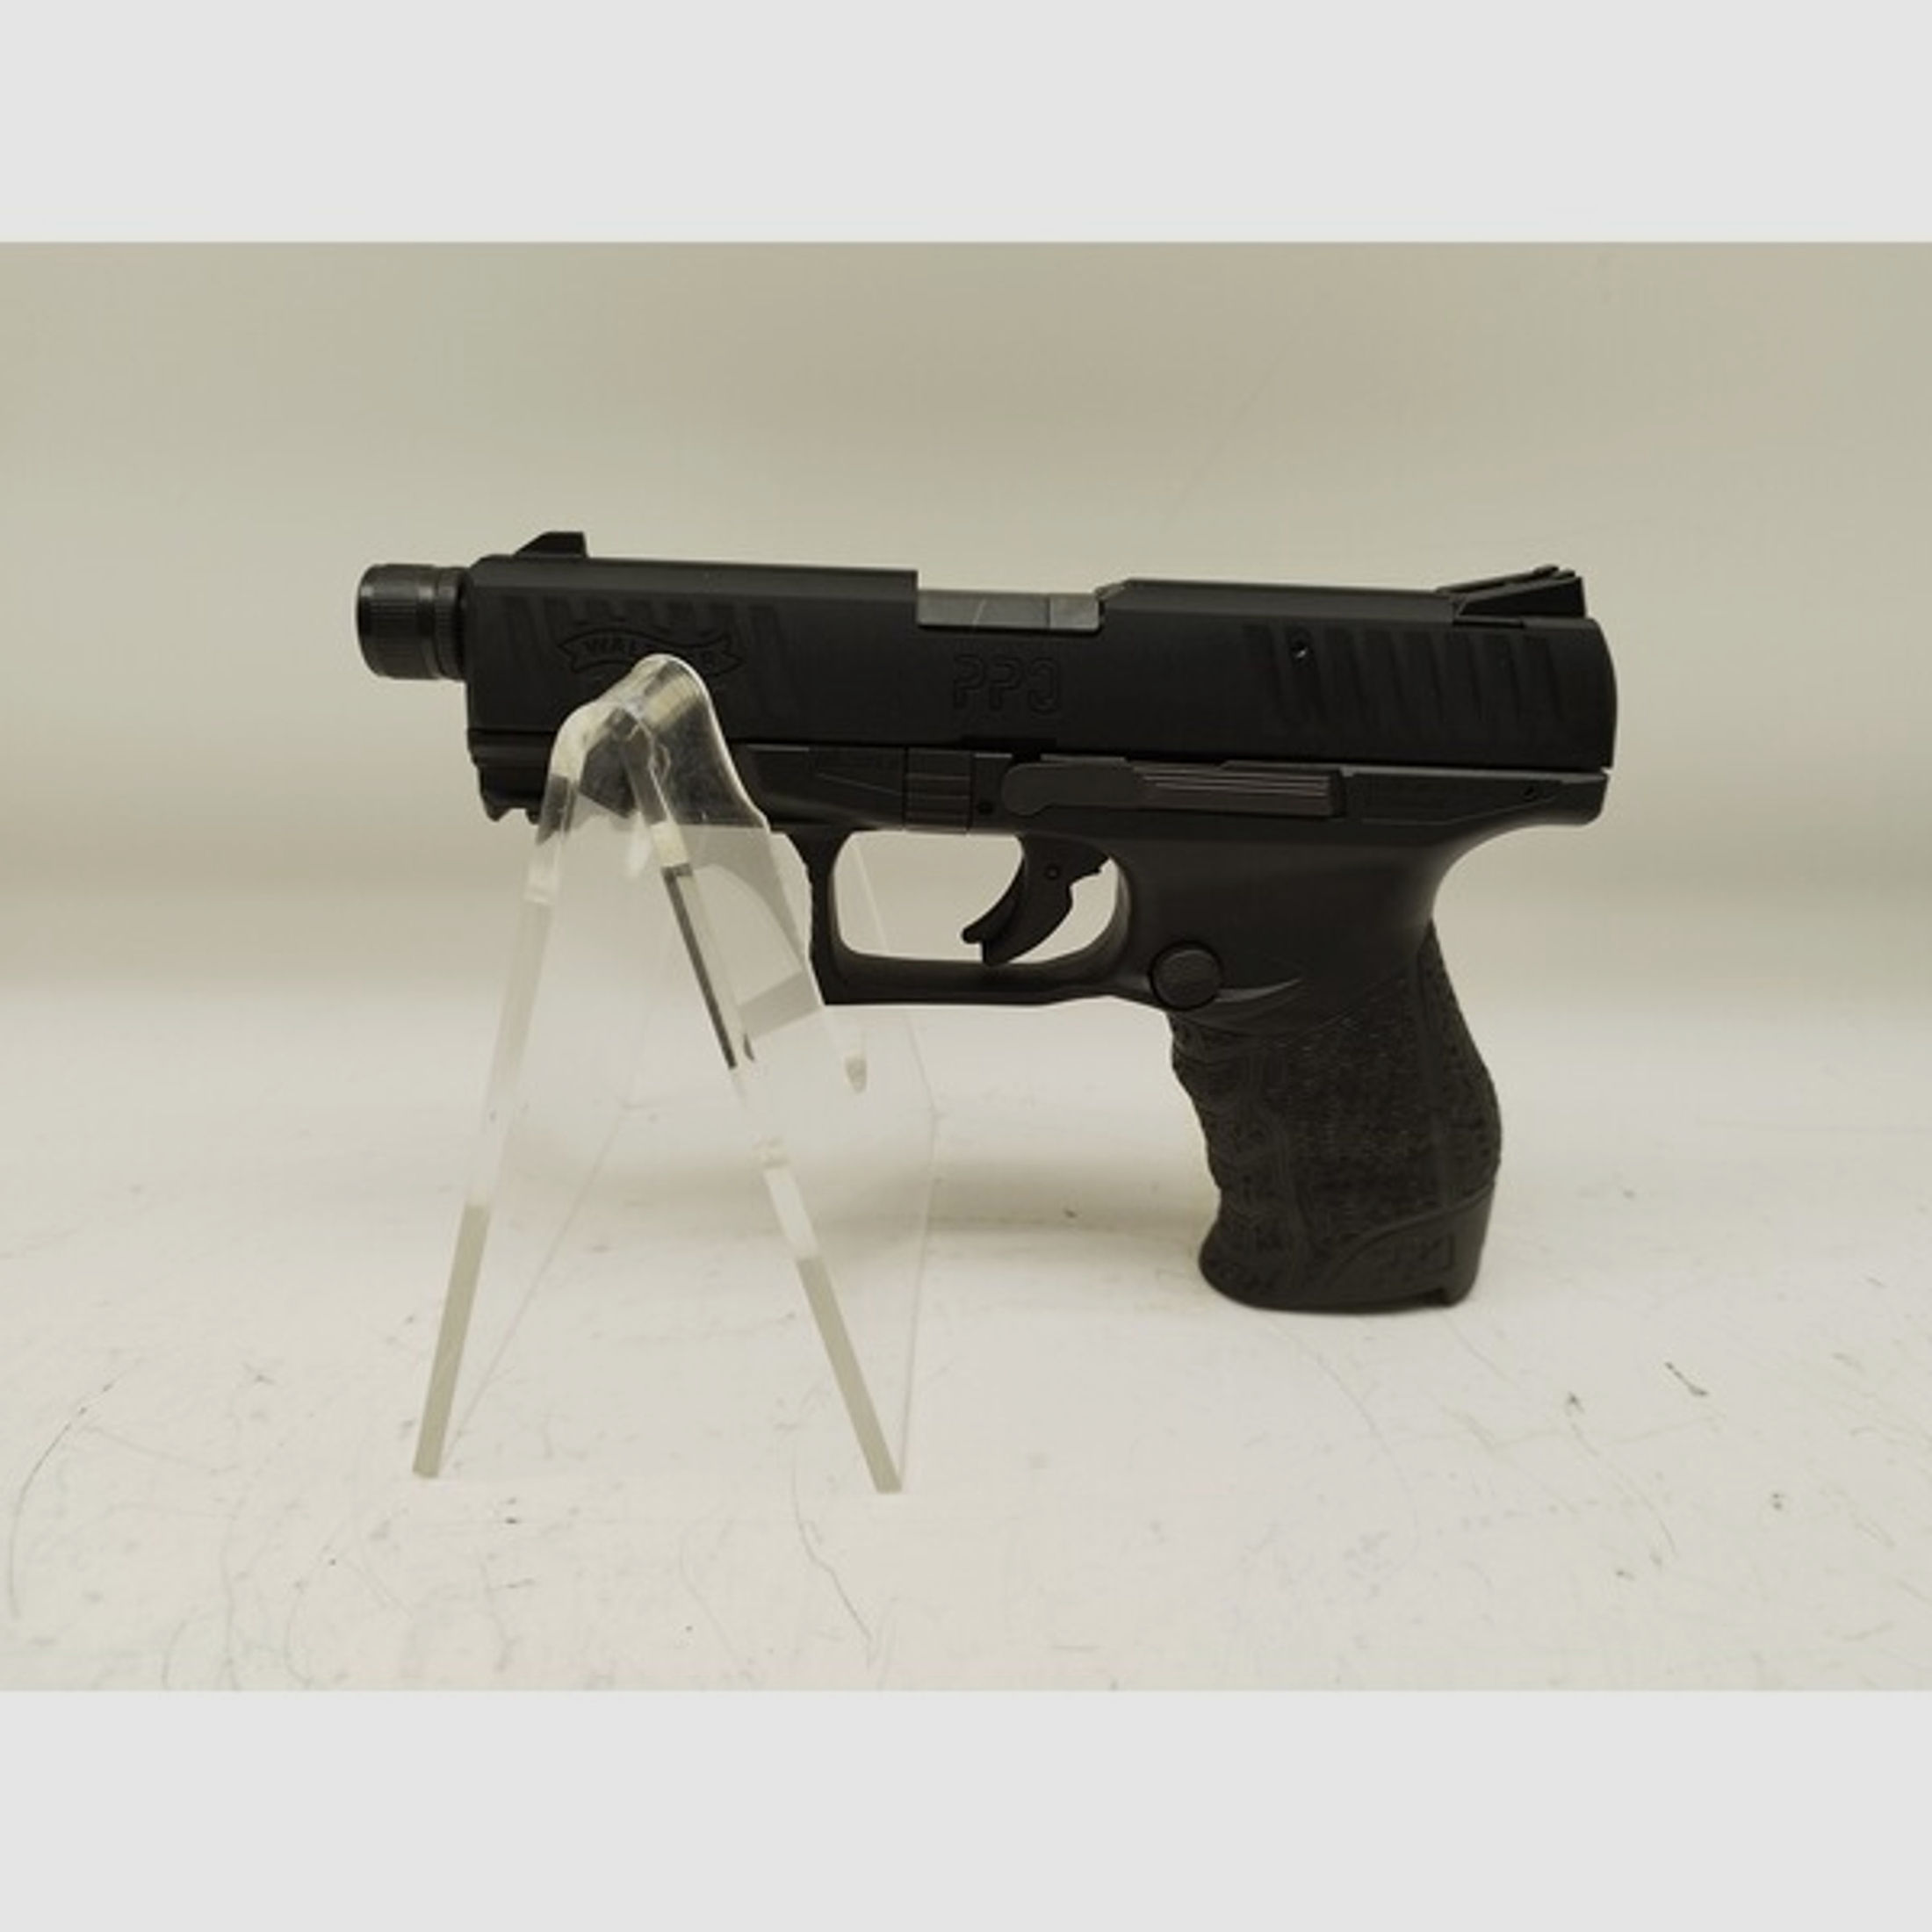 Pistole Walther PPQ22 M2 Tacatical Kal.22lr.